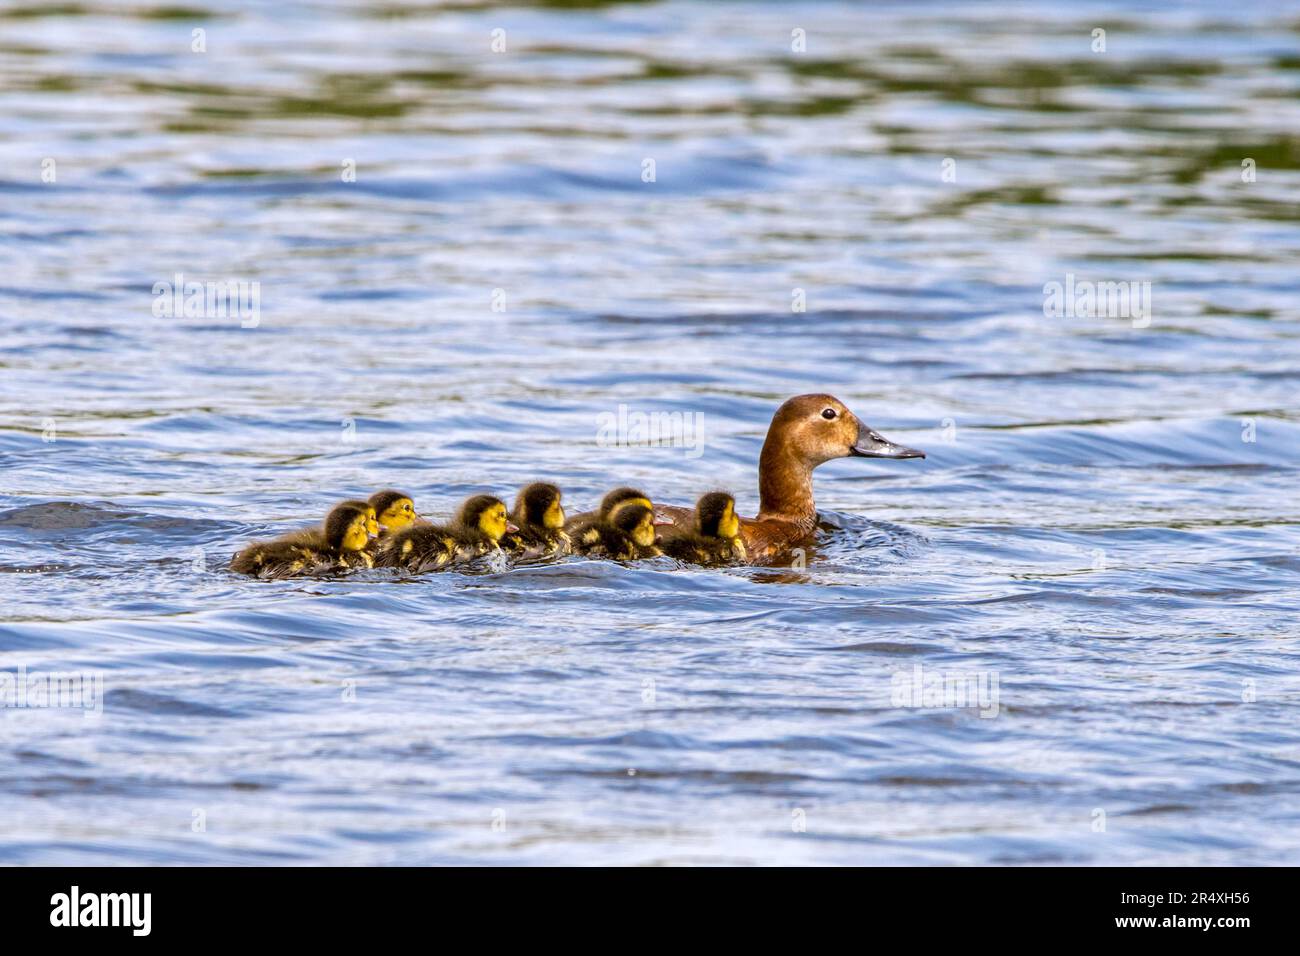 Common pochard (Aythya ferina) female swimming with chicks / ducklings in water of pond / lake in spring Stock Photo